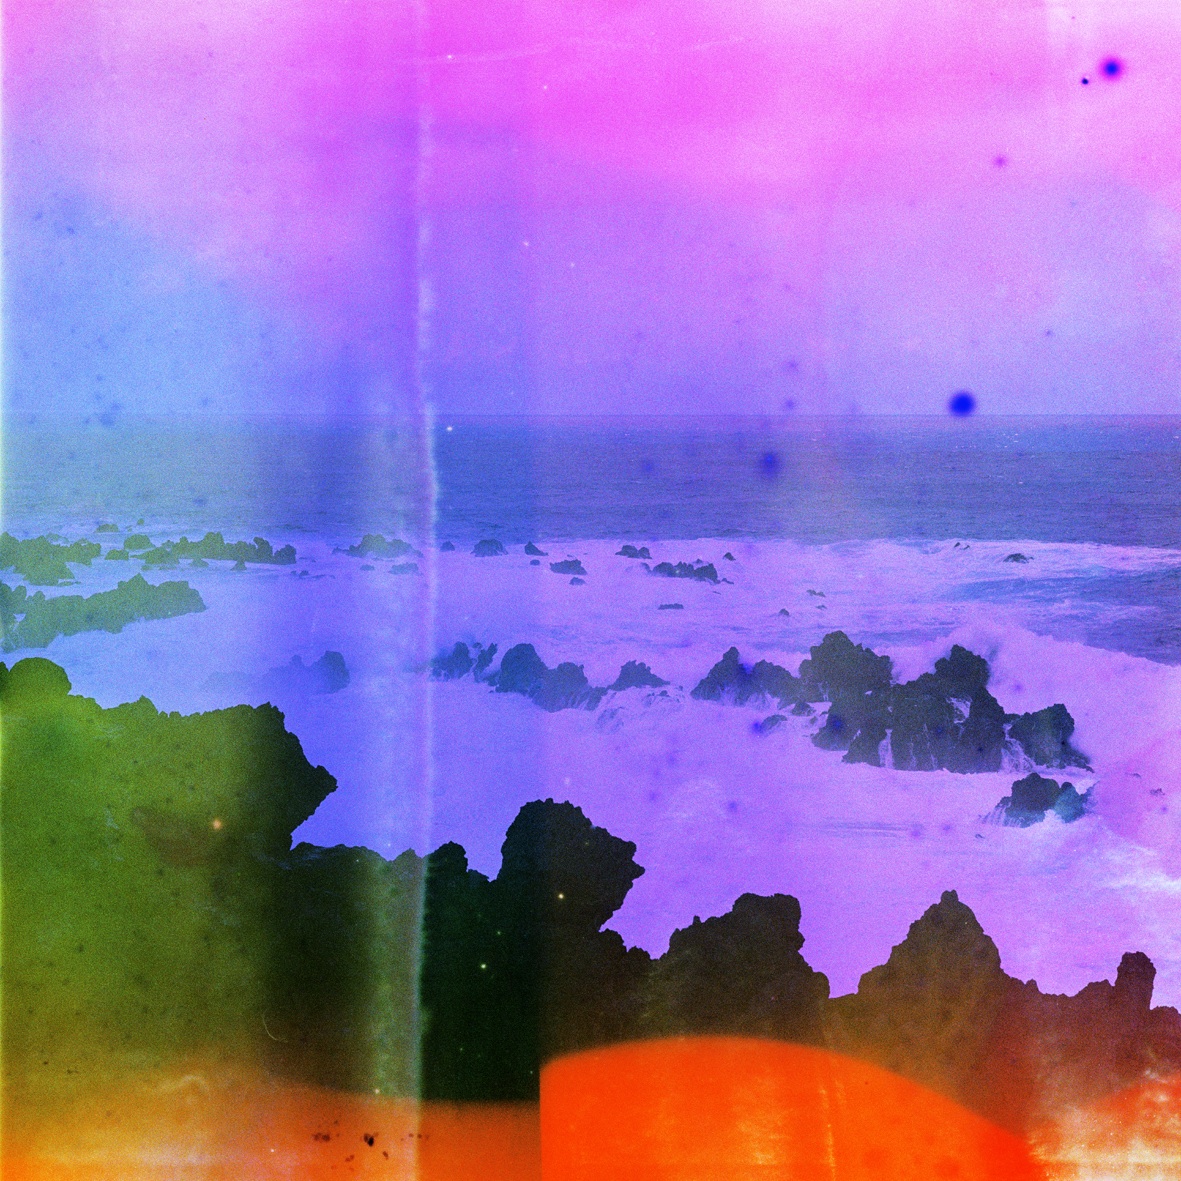  A Portrait of a Landscape of Short-lived Waves with their Dead Magician Cousin, 2014, C-print from a chemically altered negative on metallic paper, 82 x 82 cm 